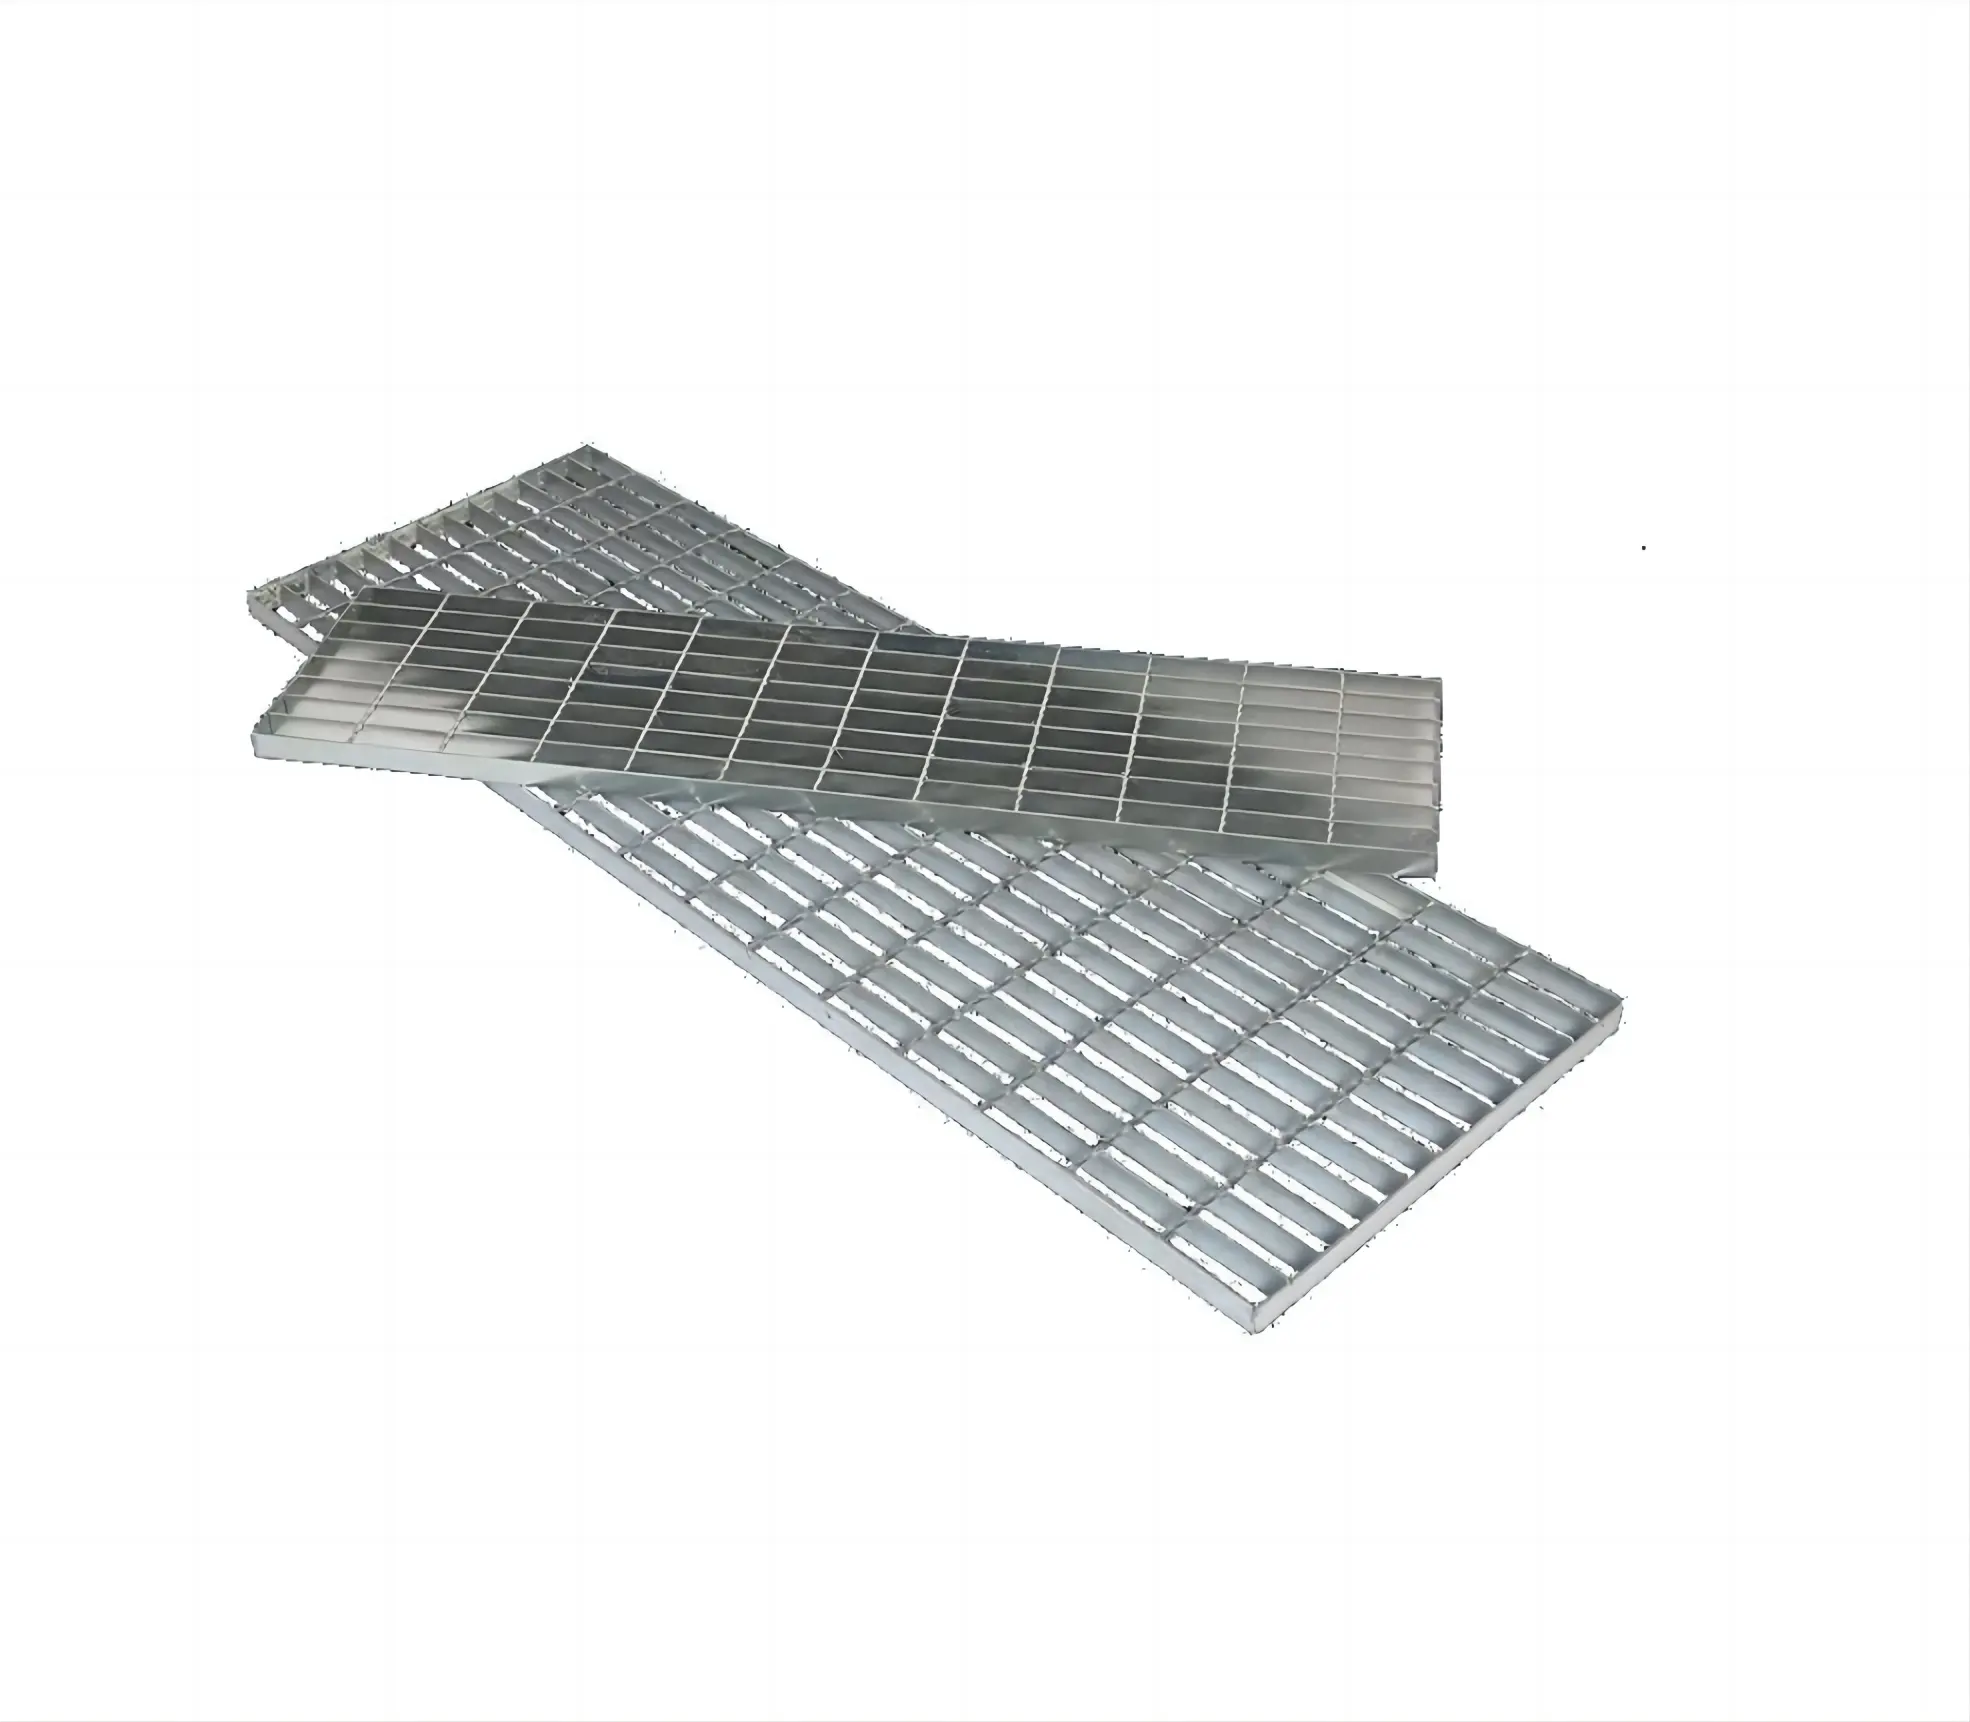 construction material customized type stainless galvanized steel grating steel bar grating for drainage cover